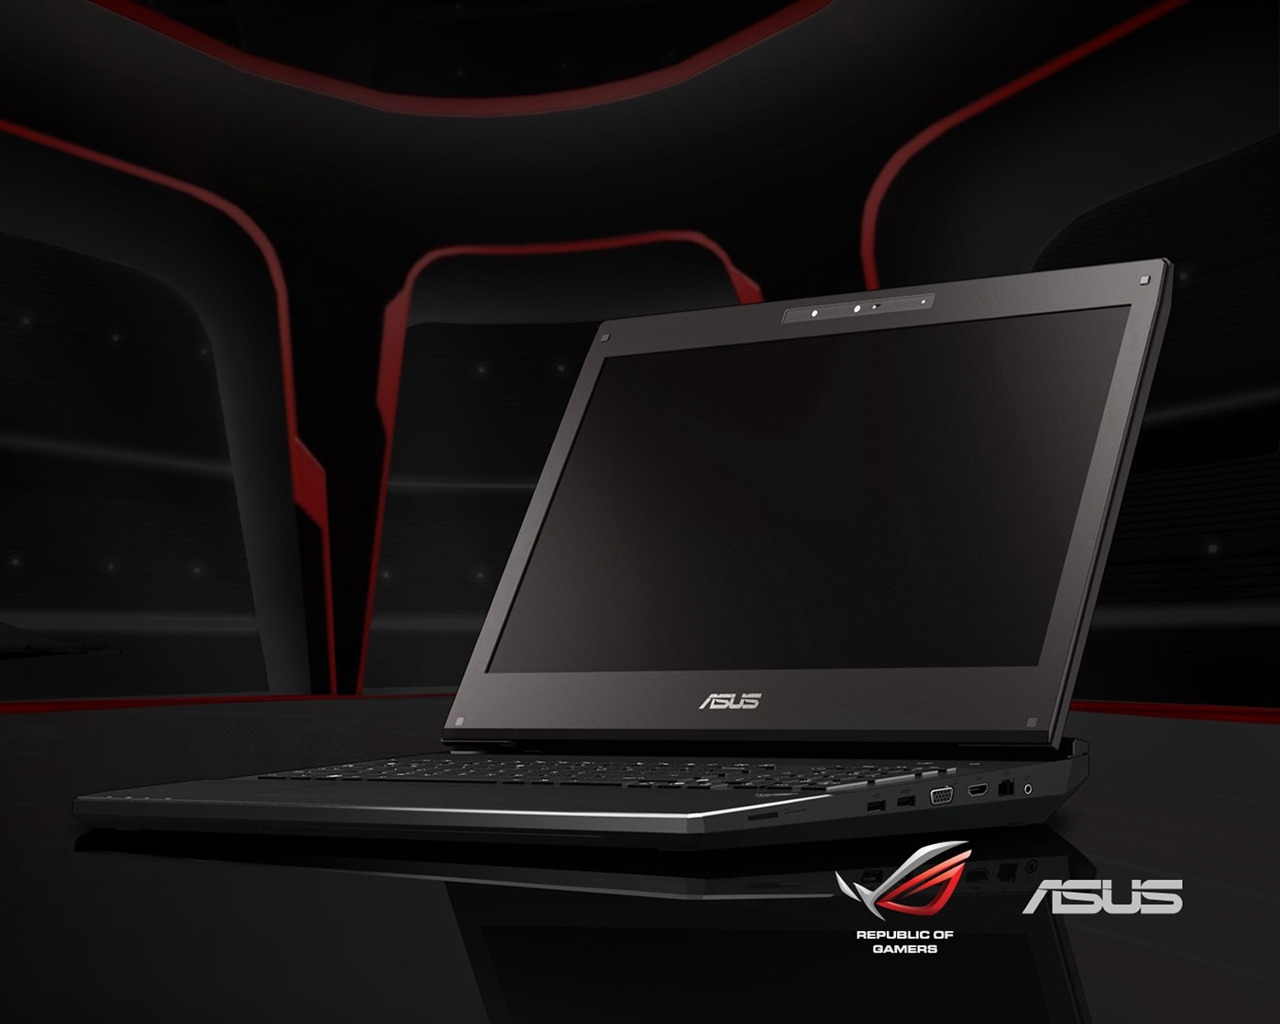 Asus Notebook for 1280 x 1024 resolution